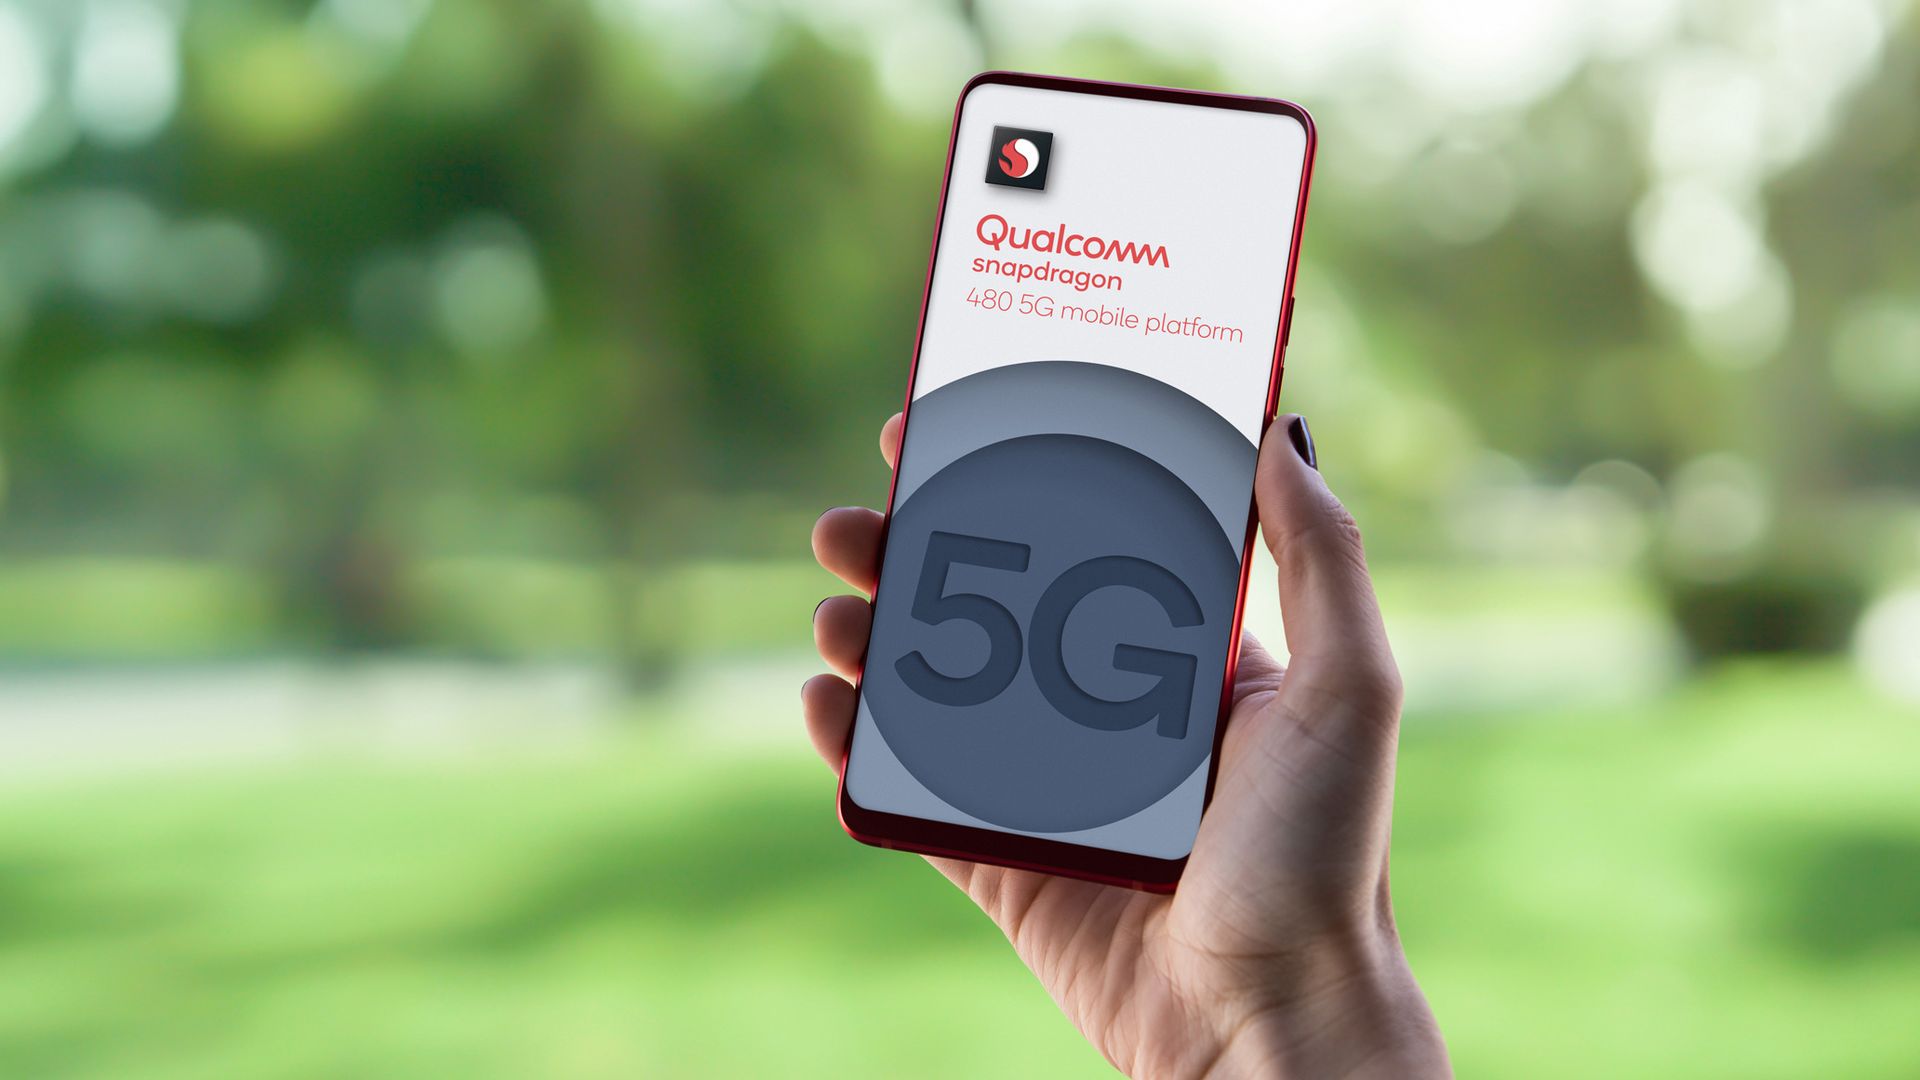 A smartphone with Qualcomm's logo along with 